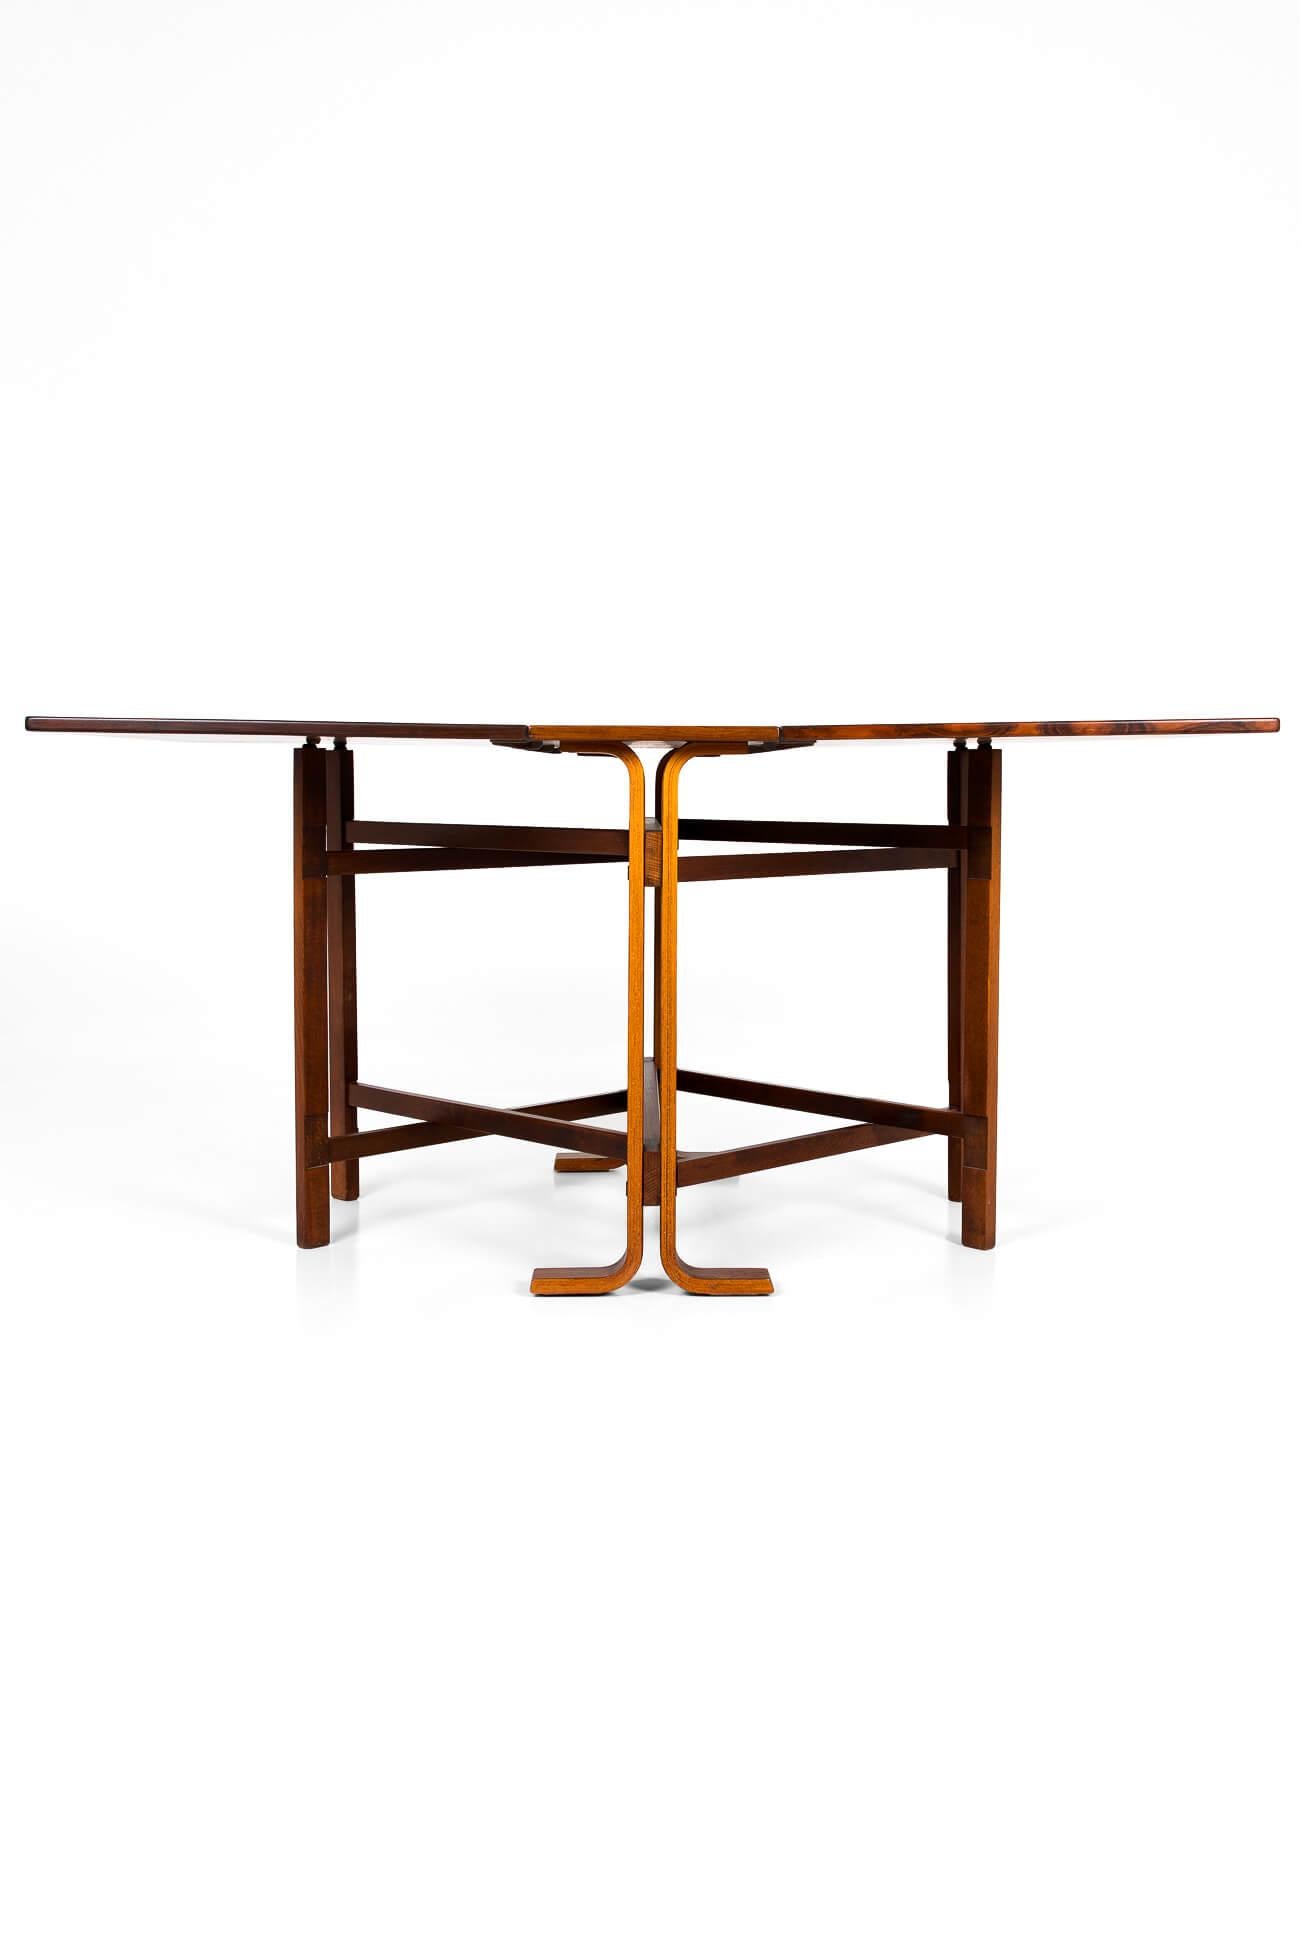 Classic mid-century drop-leaf dining table by Bendt Winge for Kleppe Møbelfabrik of Norway. With wonderful clean lines, this is the rarer version of Model 4 by Bendt Winge with a rosewood top and teak base. In immaculate condition, the table leaves